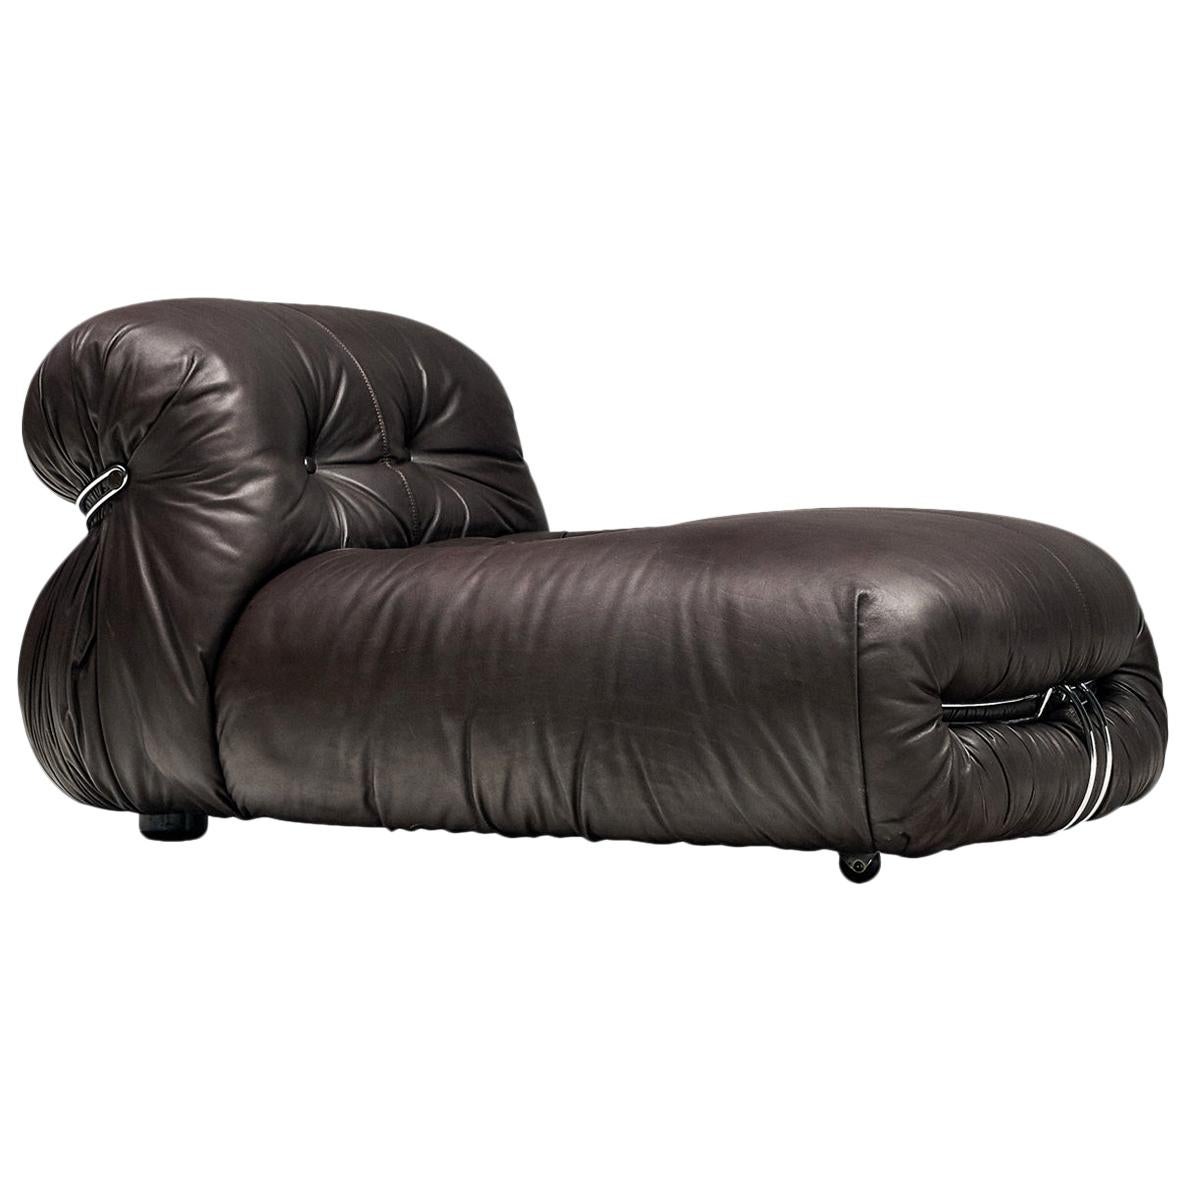 Tobia Scarpa for Cassina 'Soriana' Chaise Longue Chair in Dark Brown Leather